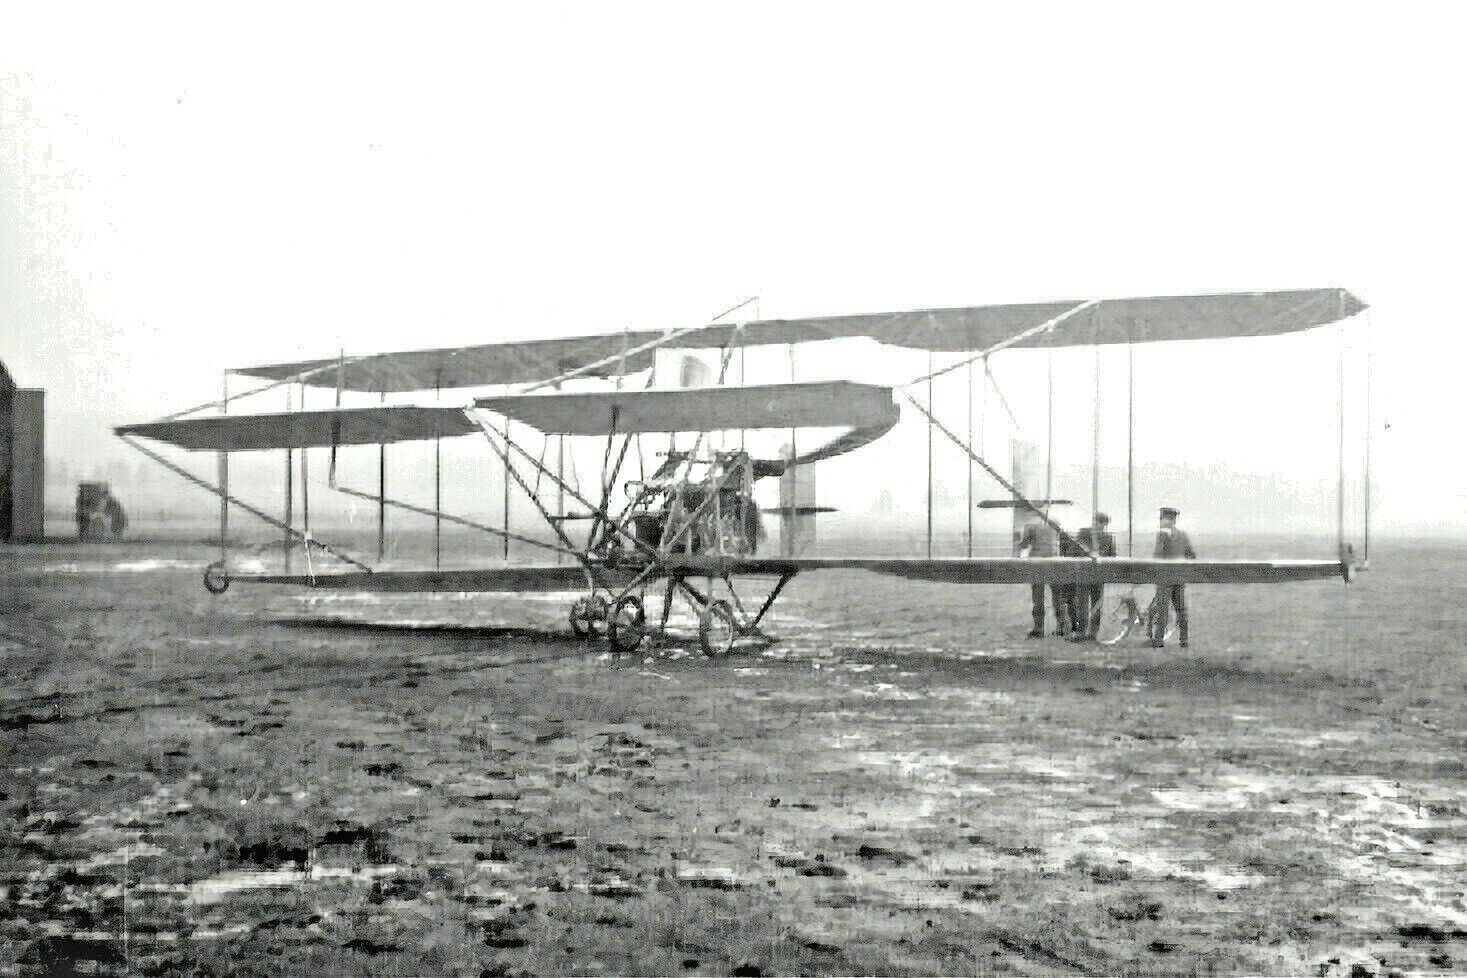 c1910 Aviation in Britain Before the First World War Cody aircraft mark IIE-8x12